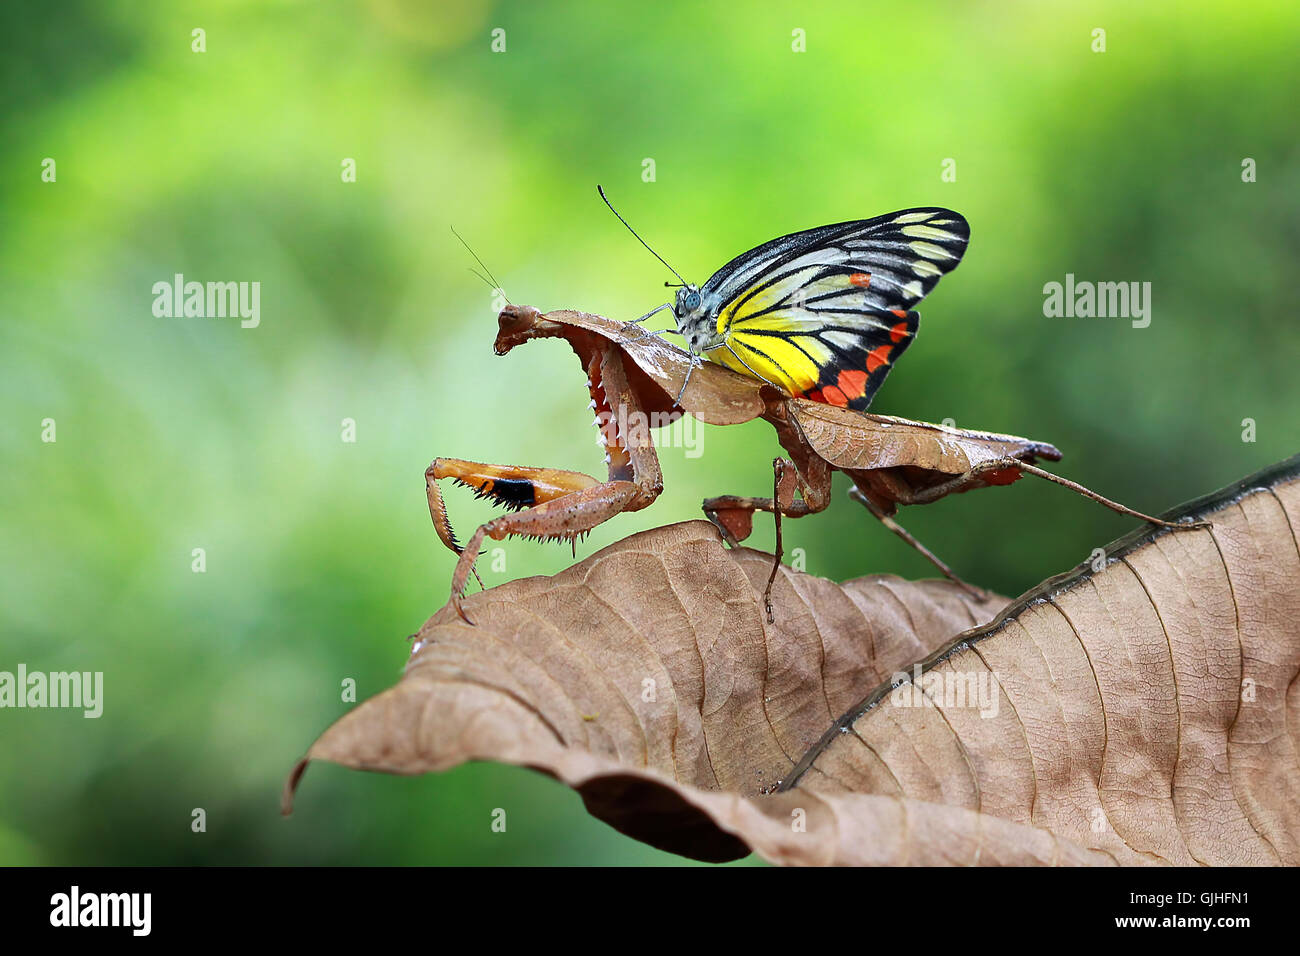 Butterfly sitting on mantis, Indonesia Stock Photo